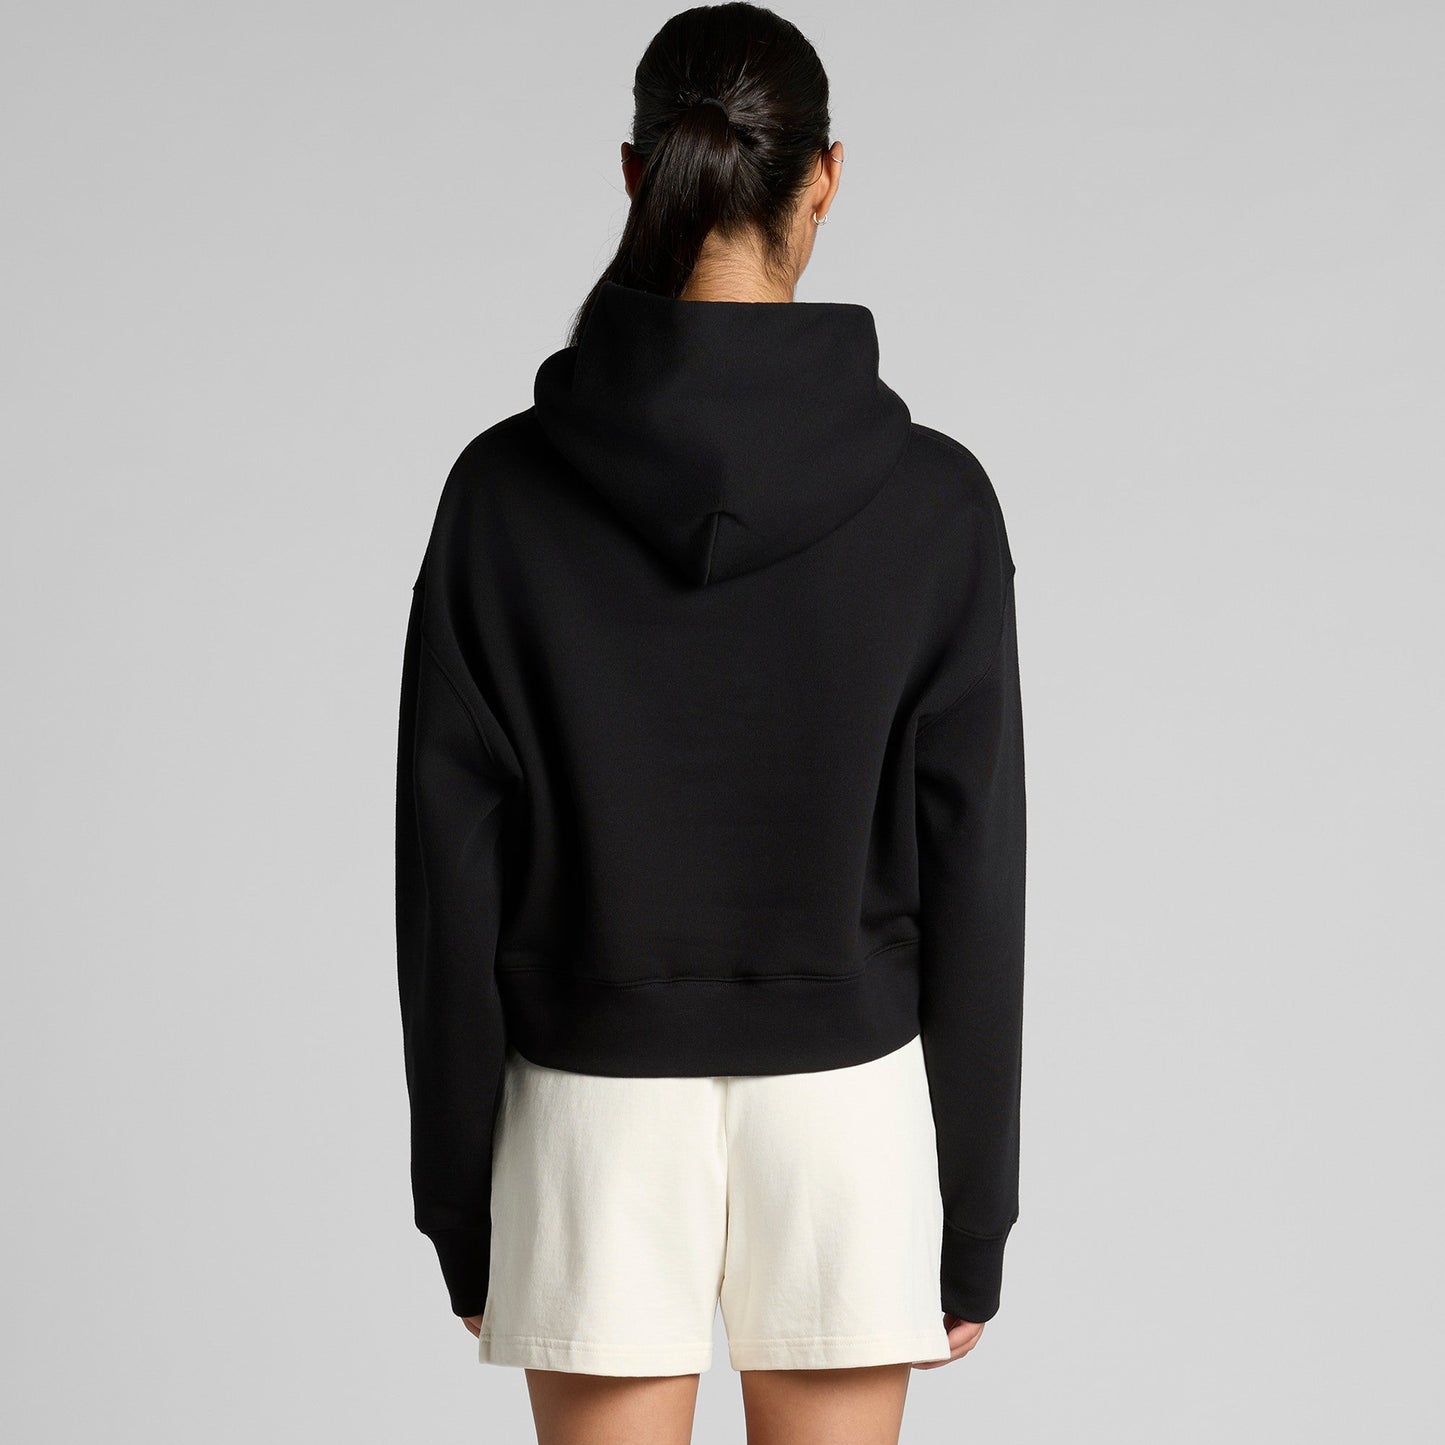 Women's Relaxed Crop Hood | COLD COFFEE LABEL